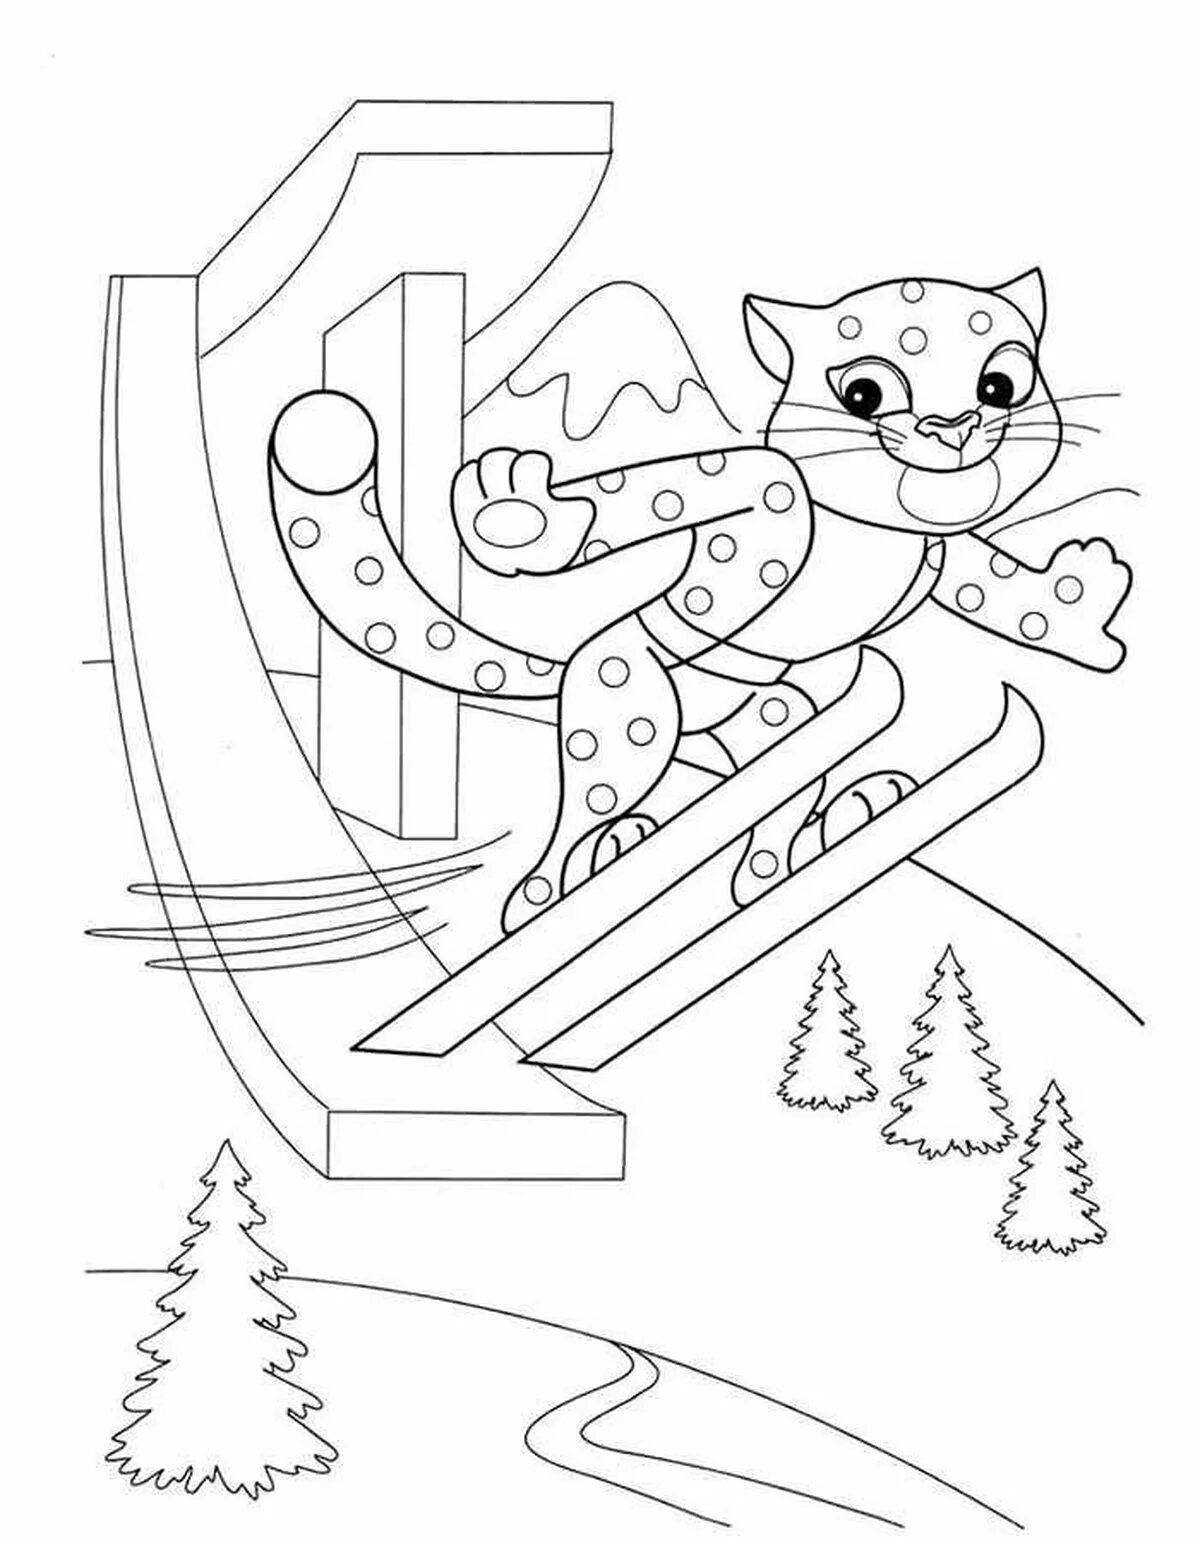 Playful dhow winter sports coloring book